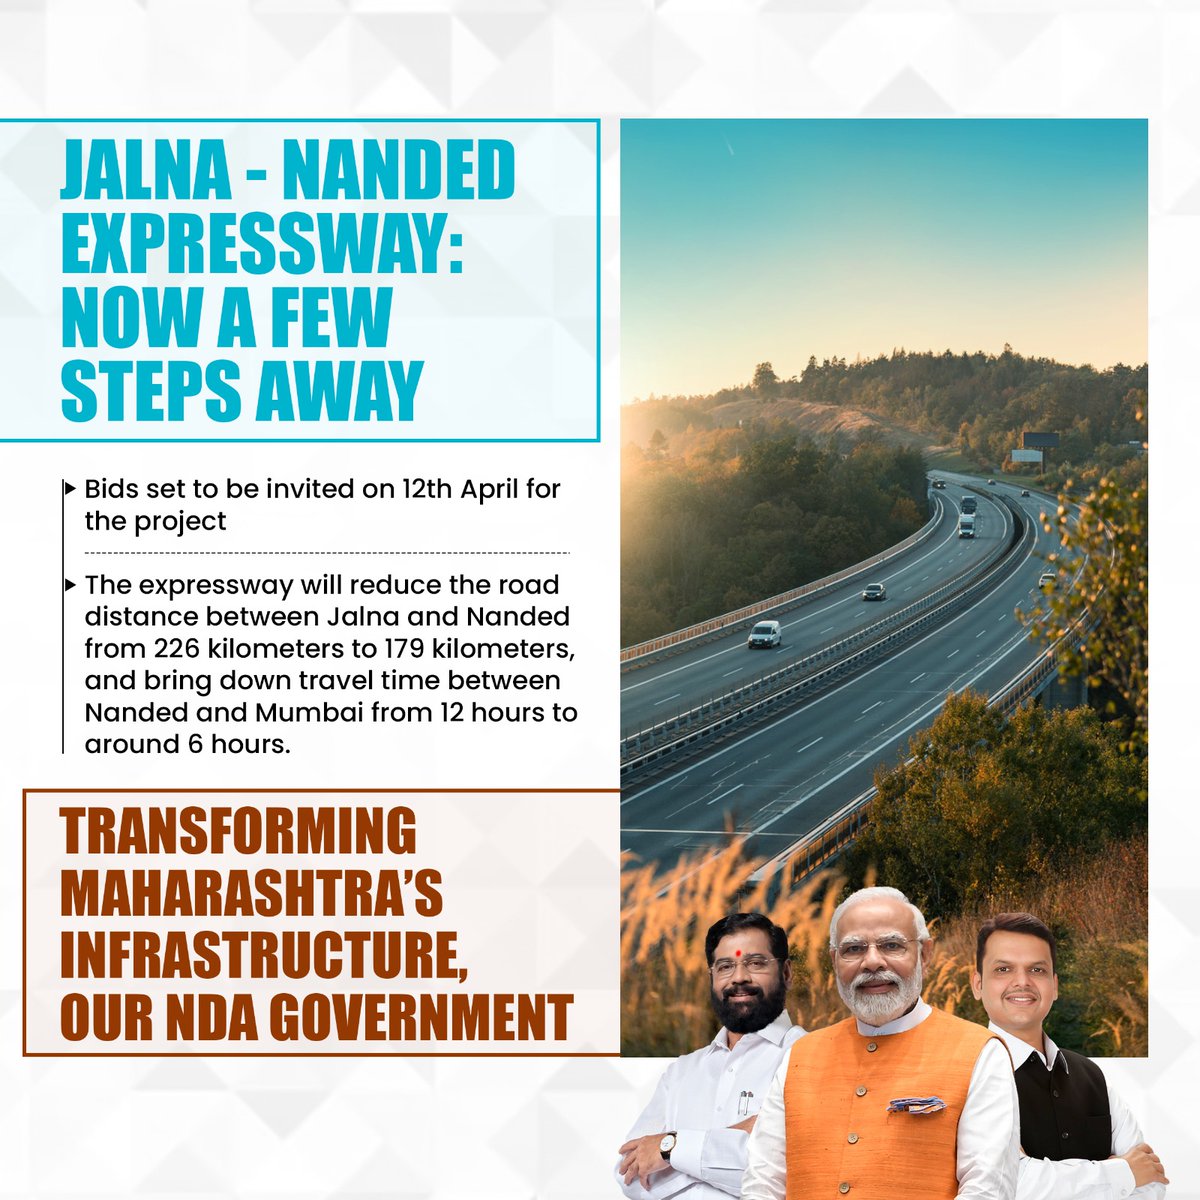 The Jalna-Nanded Expressway project promises to halve travel time between Nanded and Mumbai, thanks to CM Eknath Shinde's vision for enhanced connectivity and economic growth.